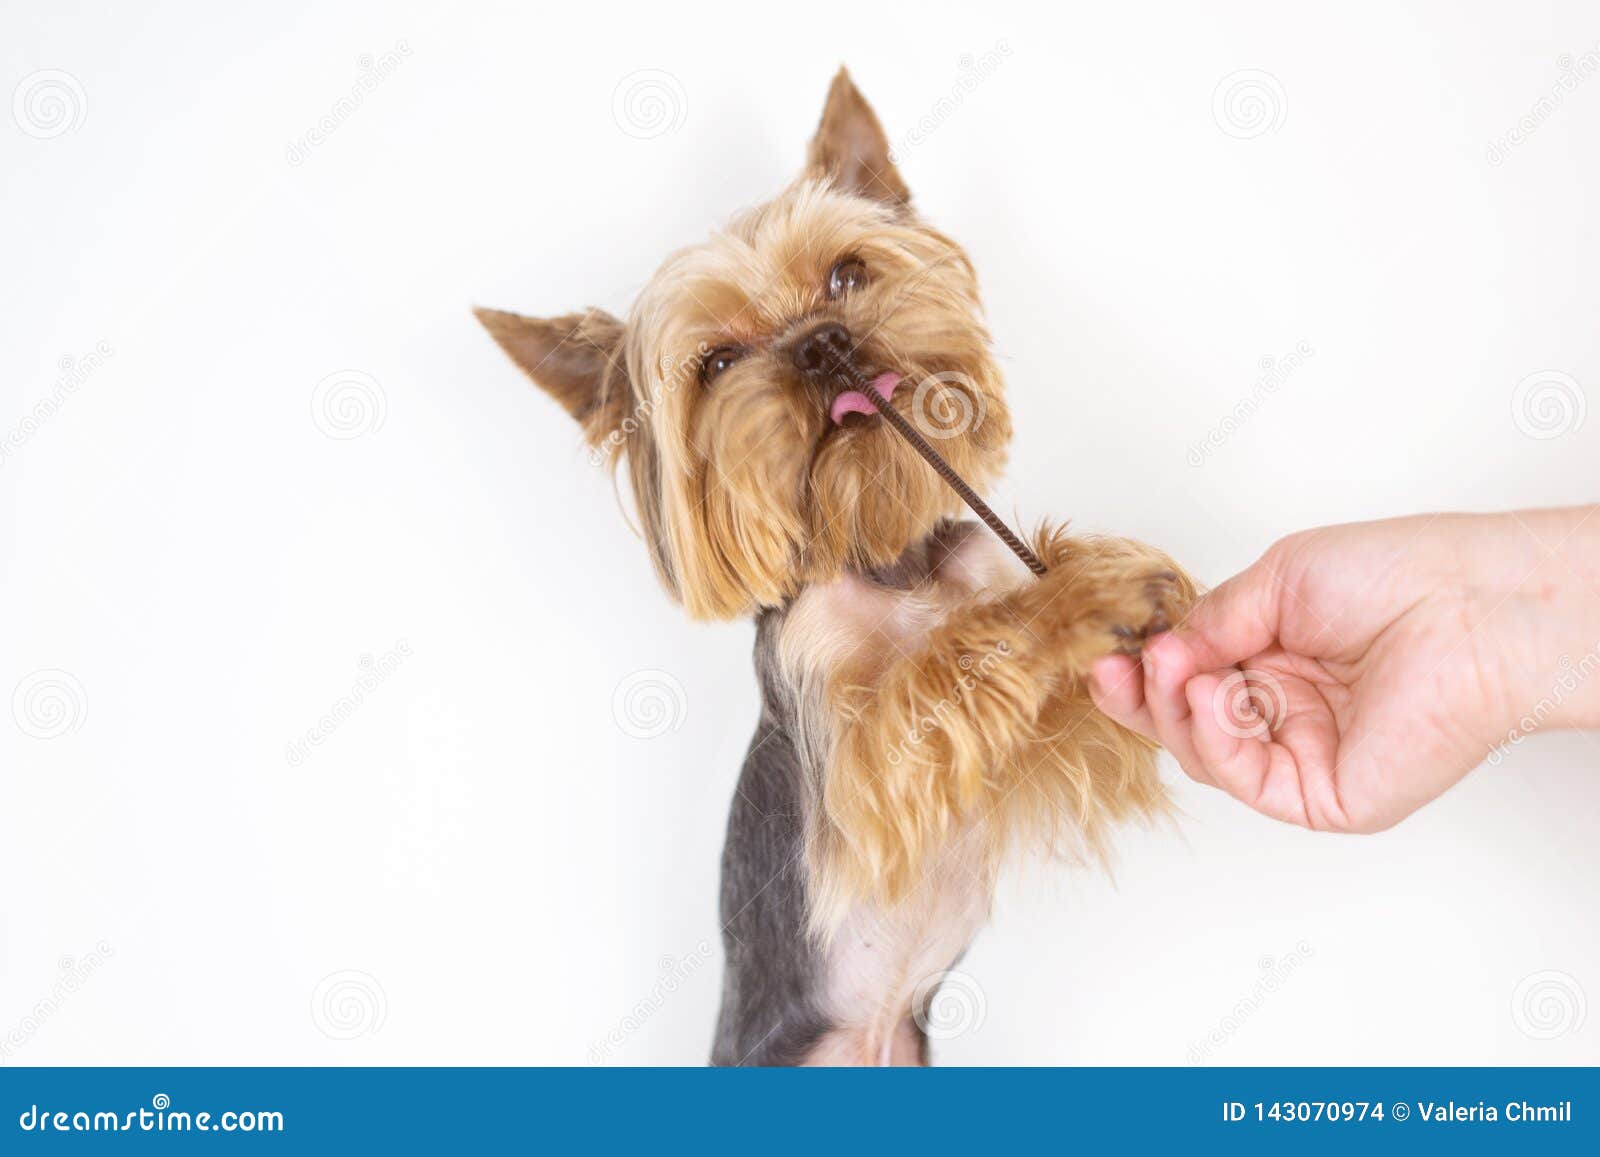 Yorkshire Terrier Dog with Comb, Grooming Stock Photo - Image of hair ...